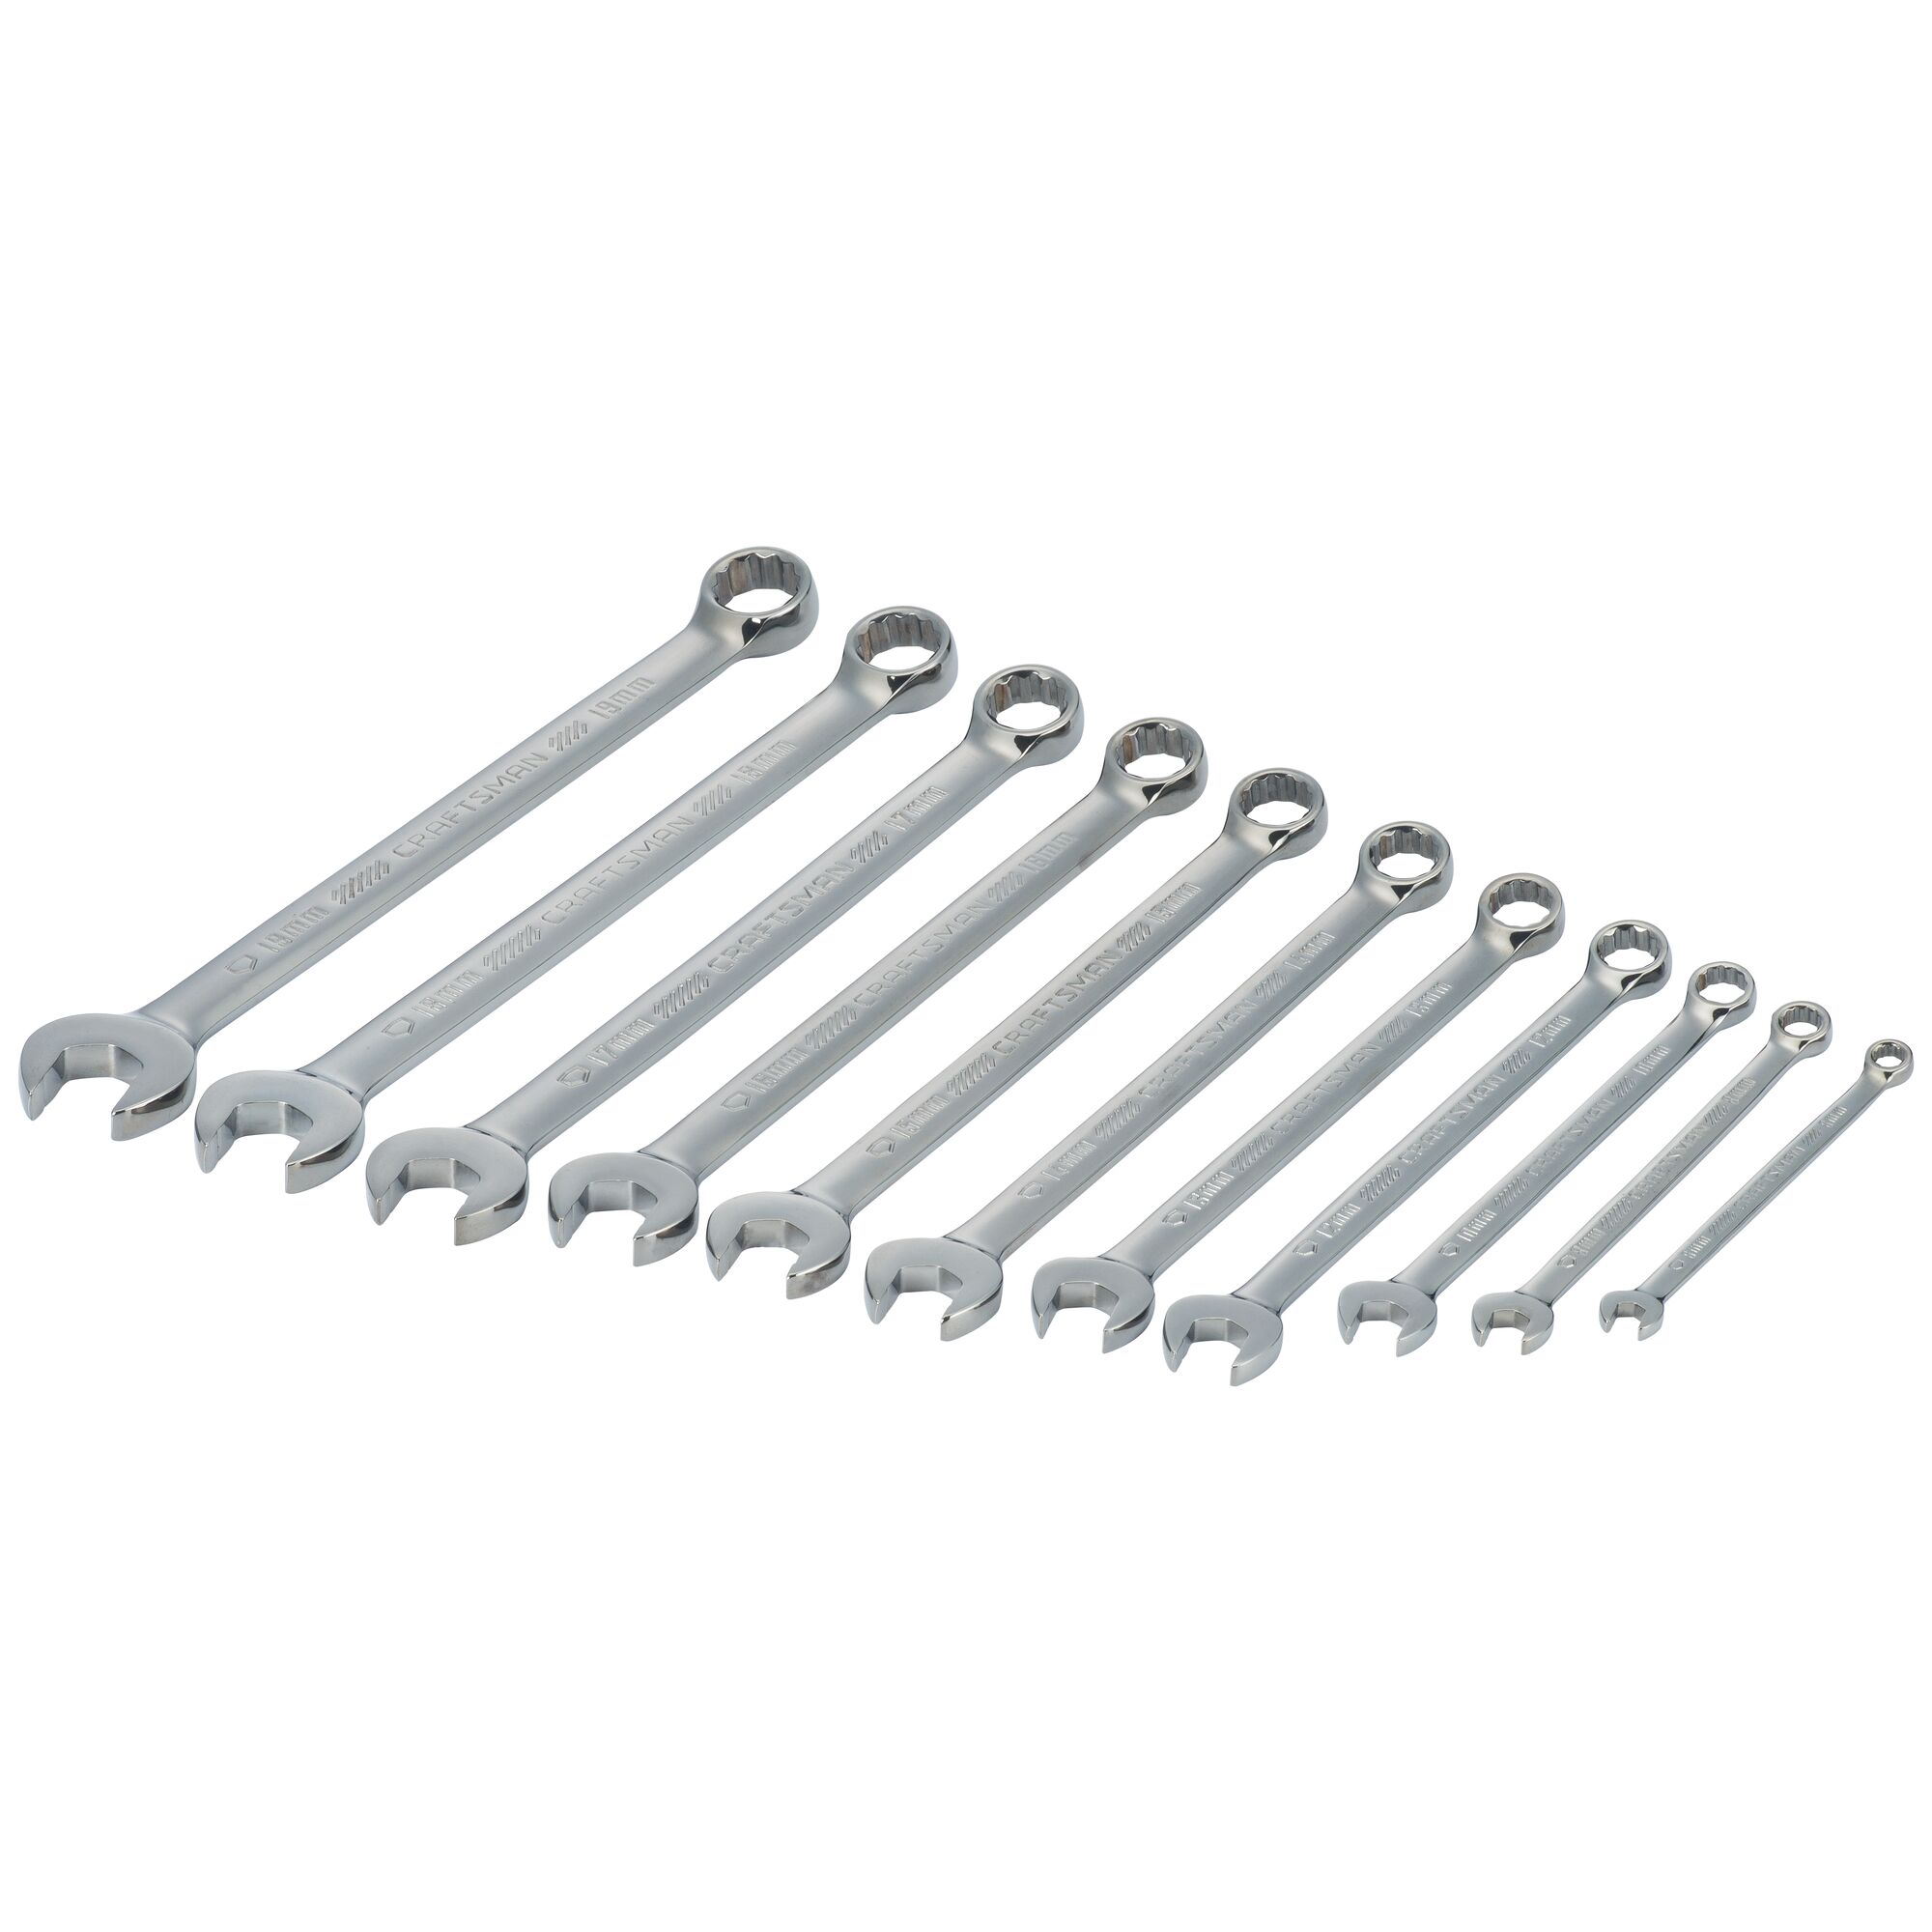 View of CRAFTSMAN Wrenches on white background